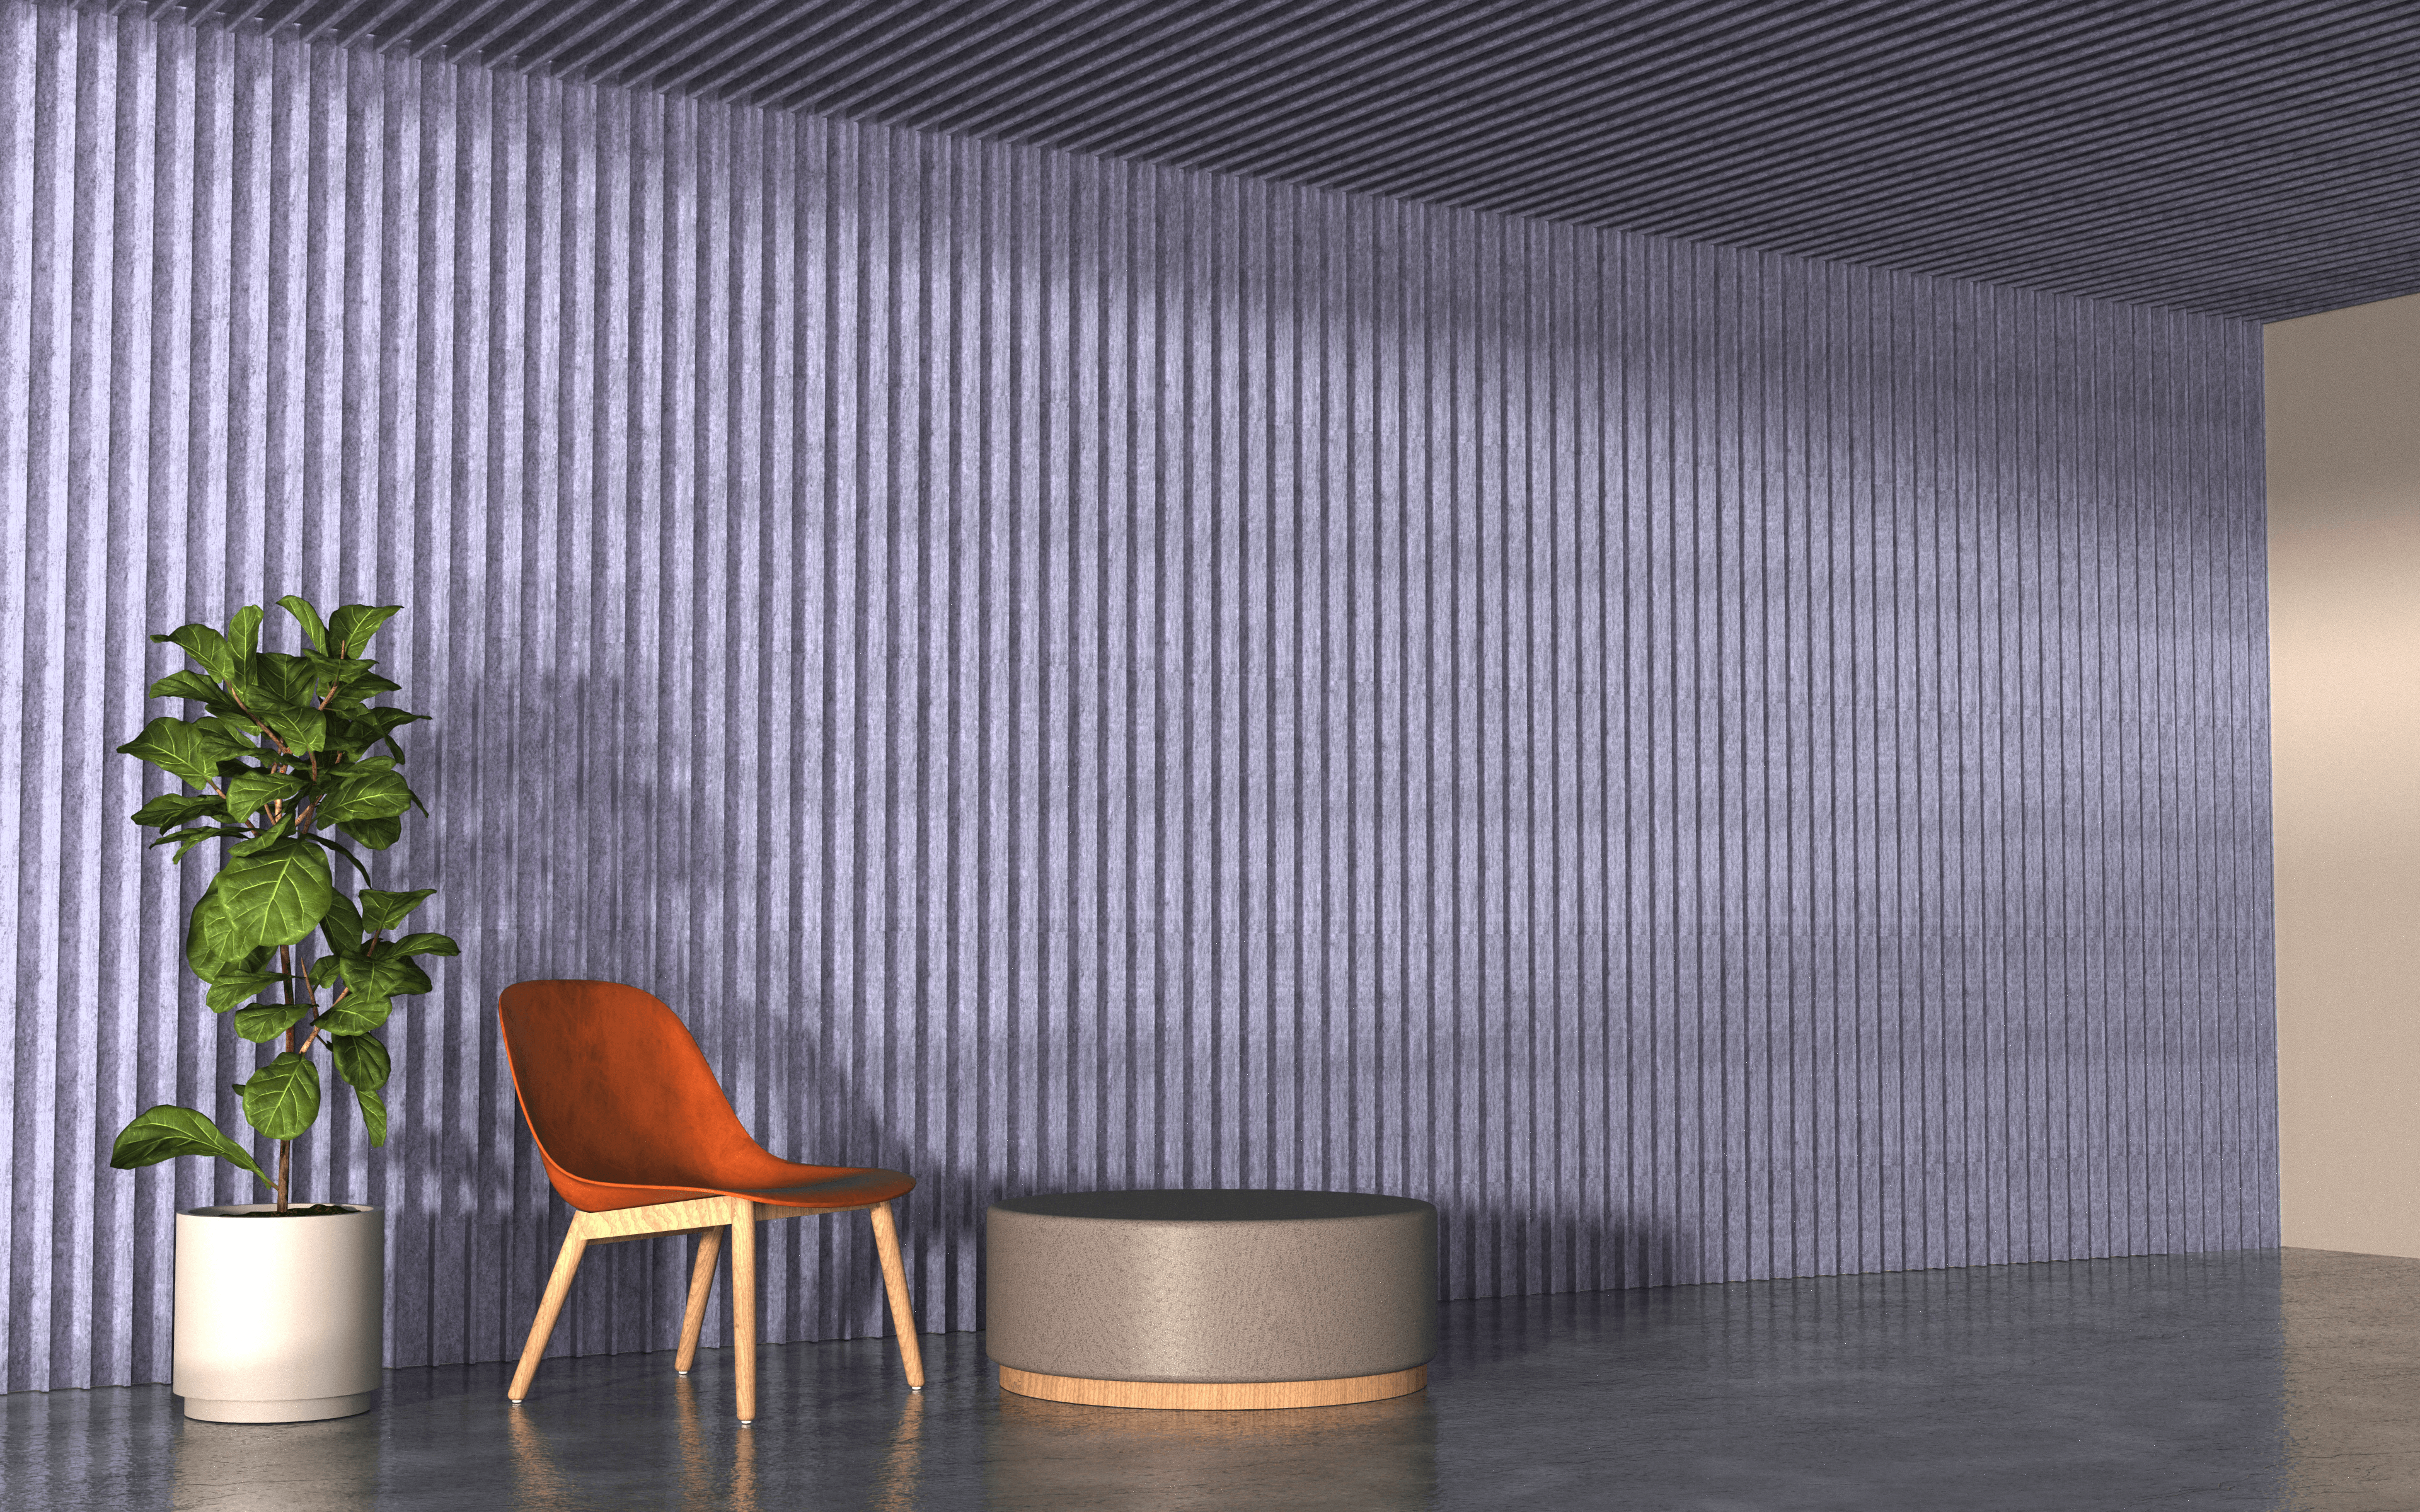 a red chair and coffee table in front of a wall lined with blue, vertically striped acoustic paneling